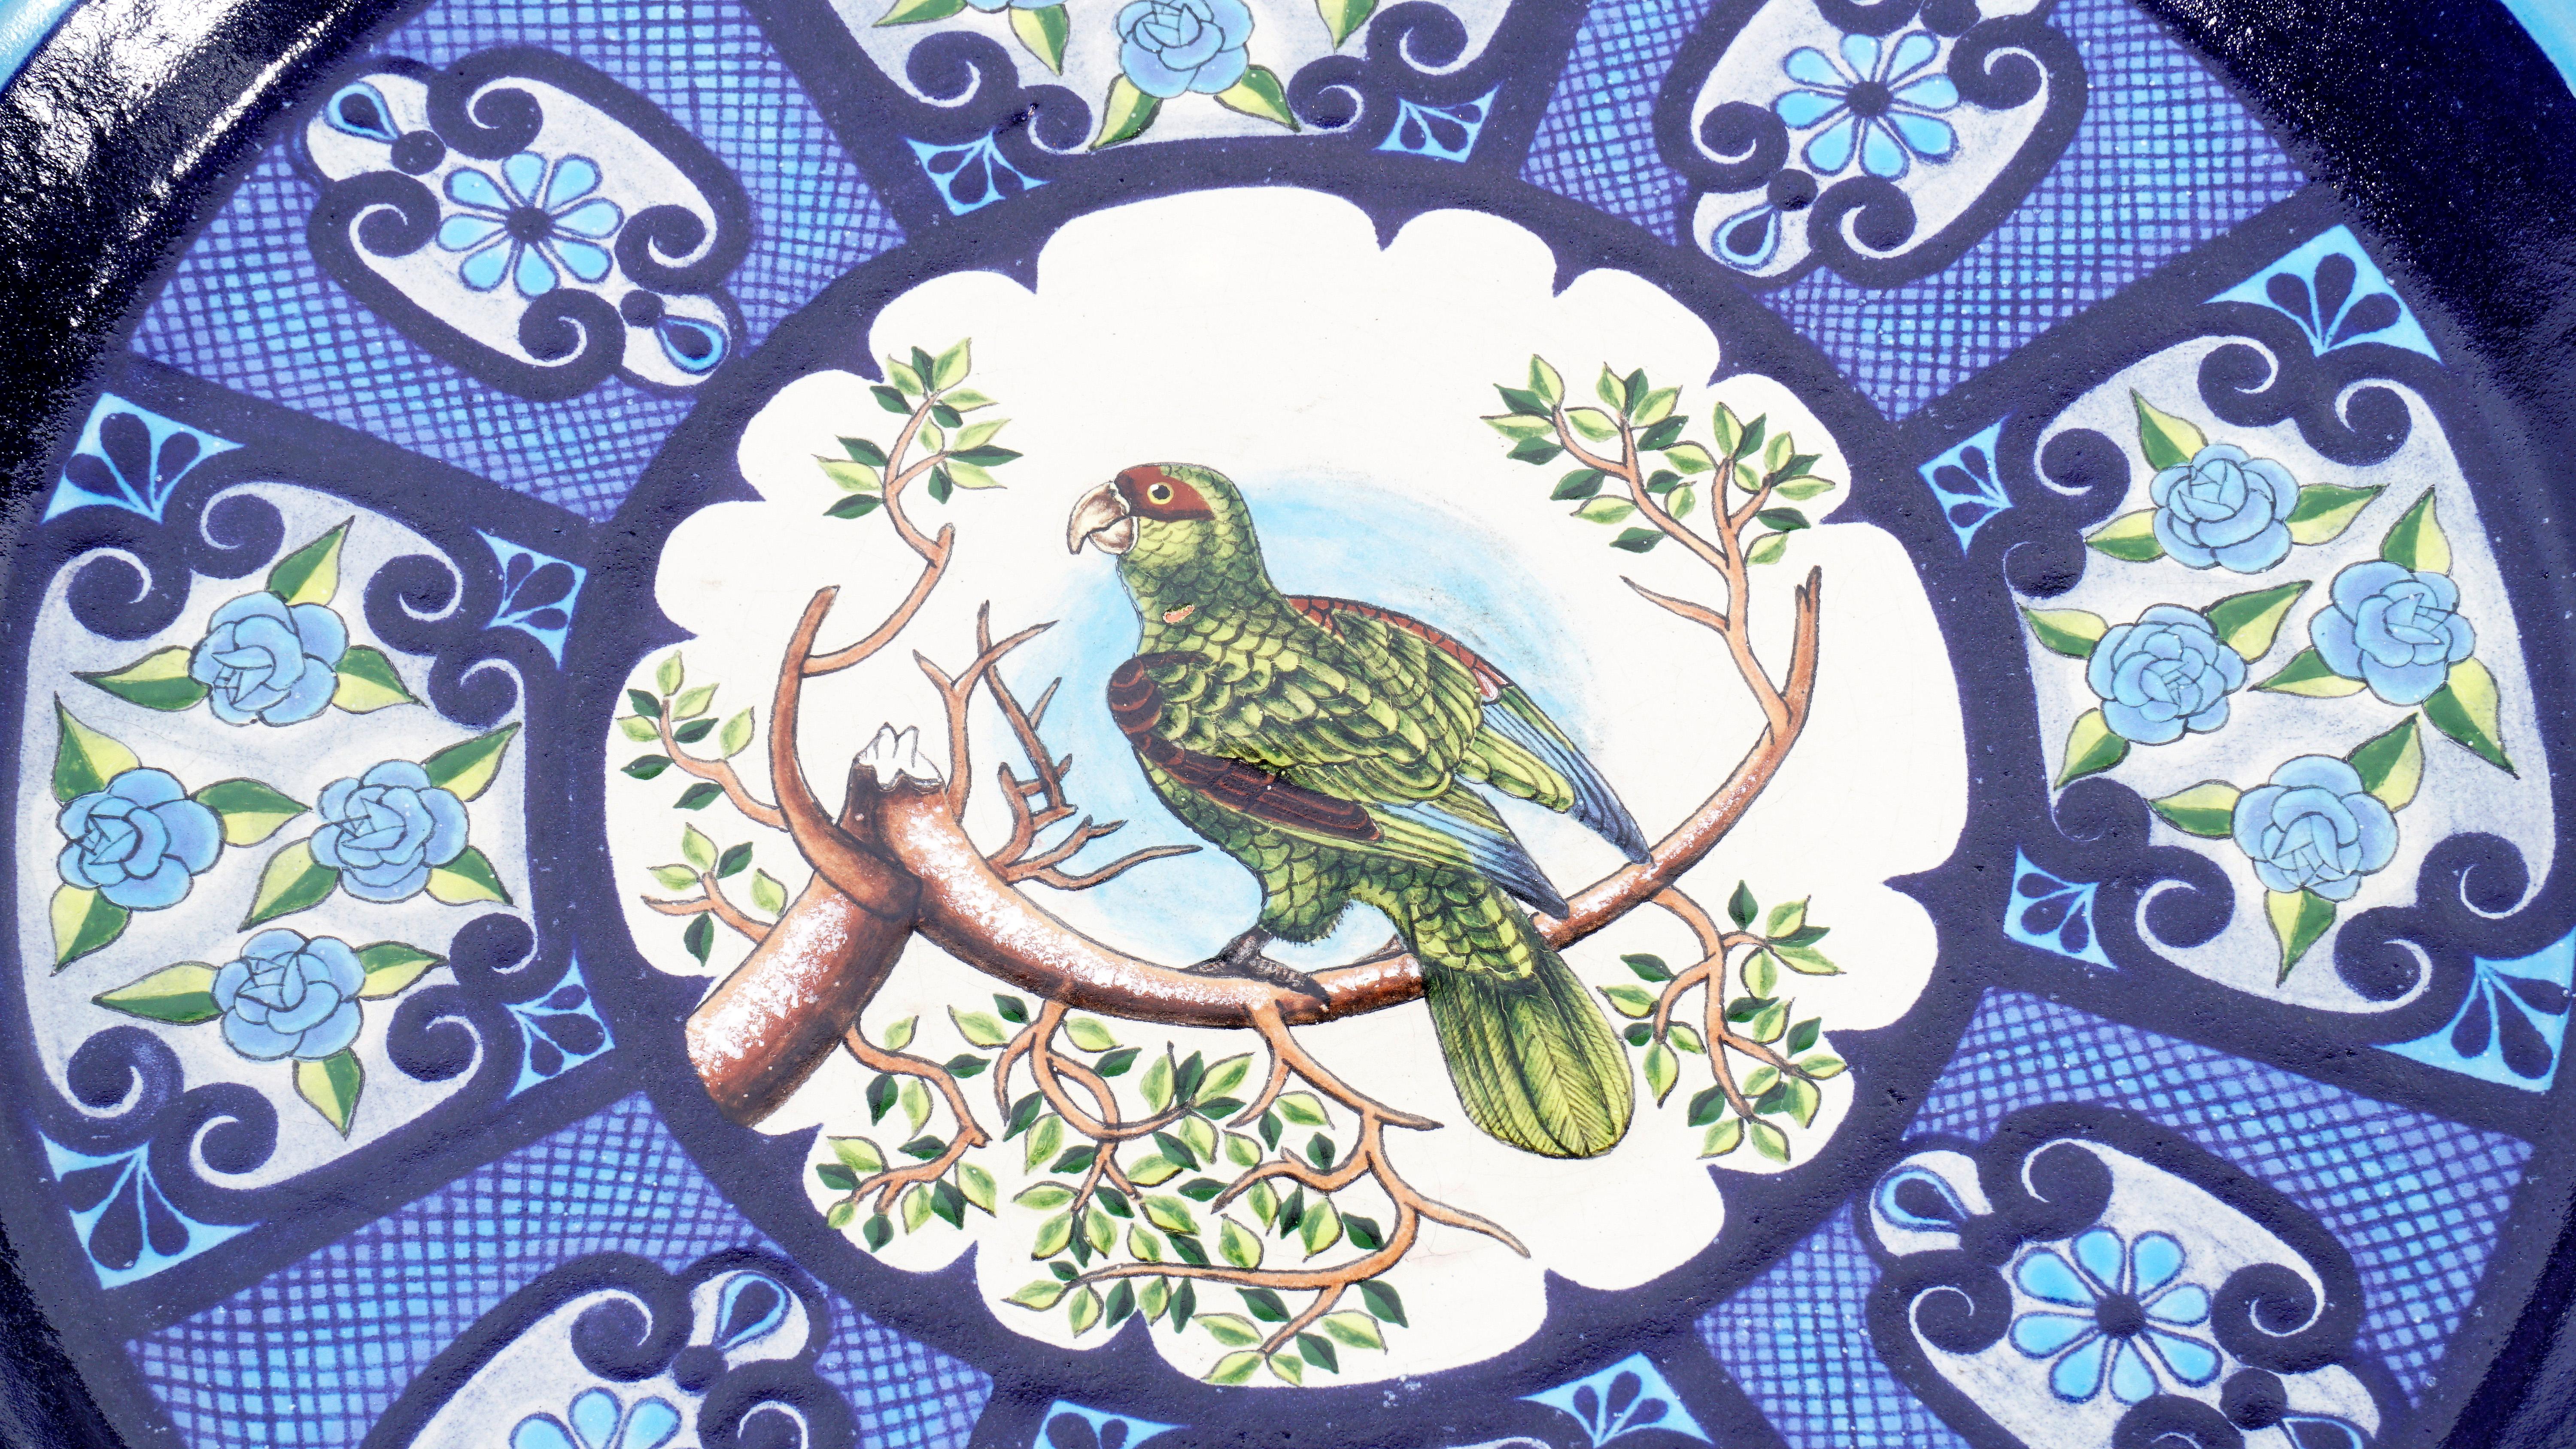 Mexican Ceramic and White Metal 'Alpaca' Toucans and Parrot Set of Plates